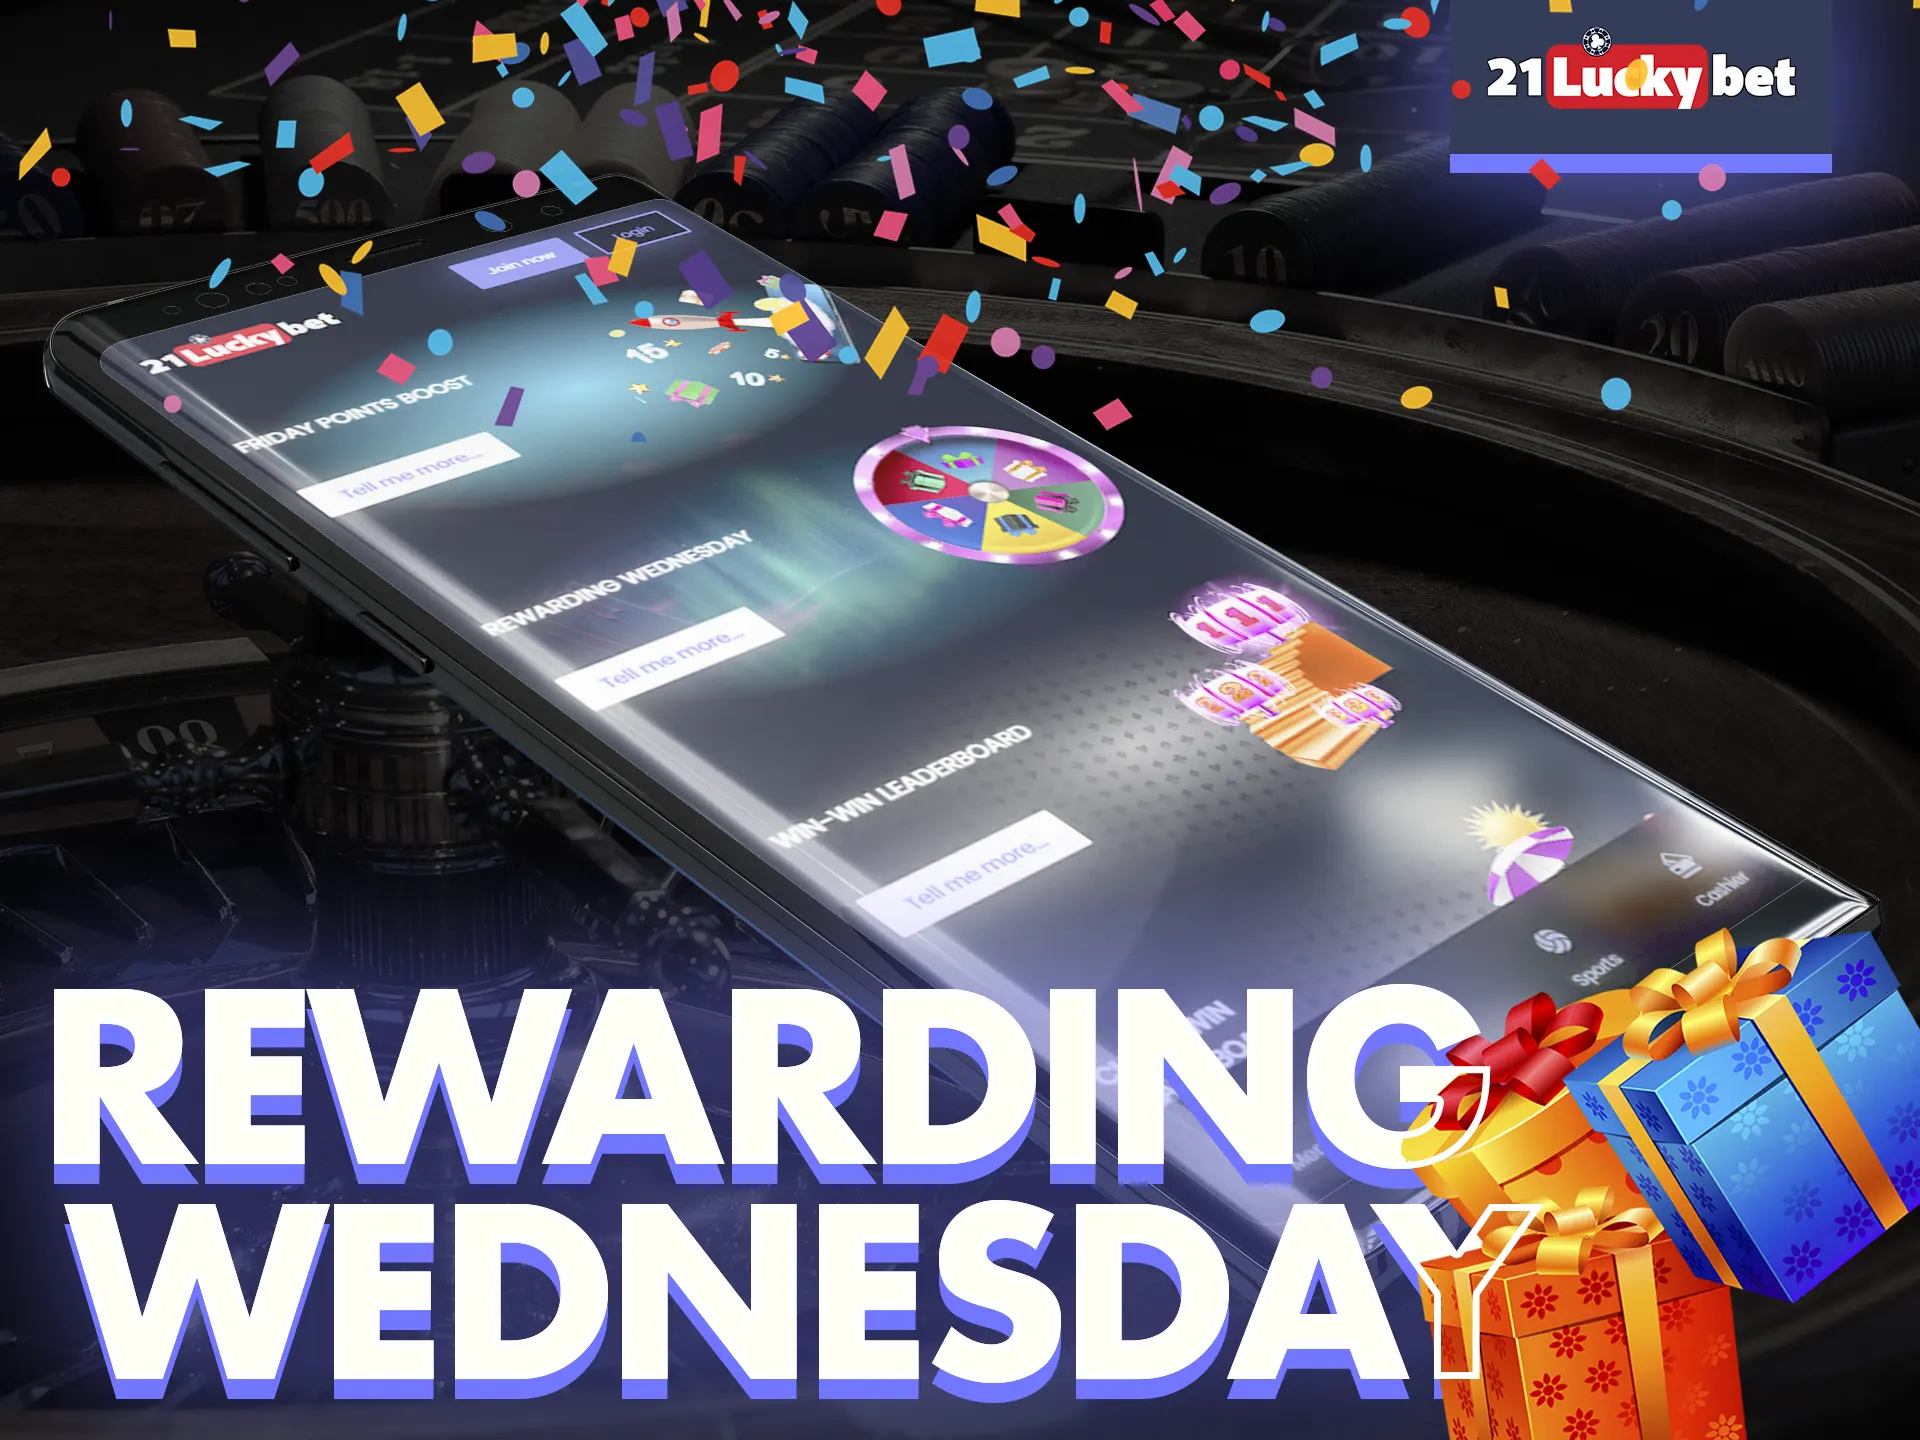 Try the special Rewarding Wednesday bonus from 21luckybet app.